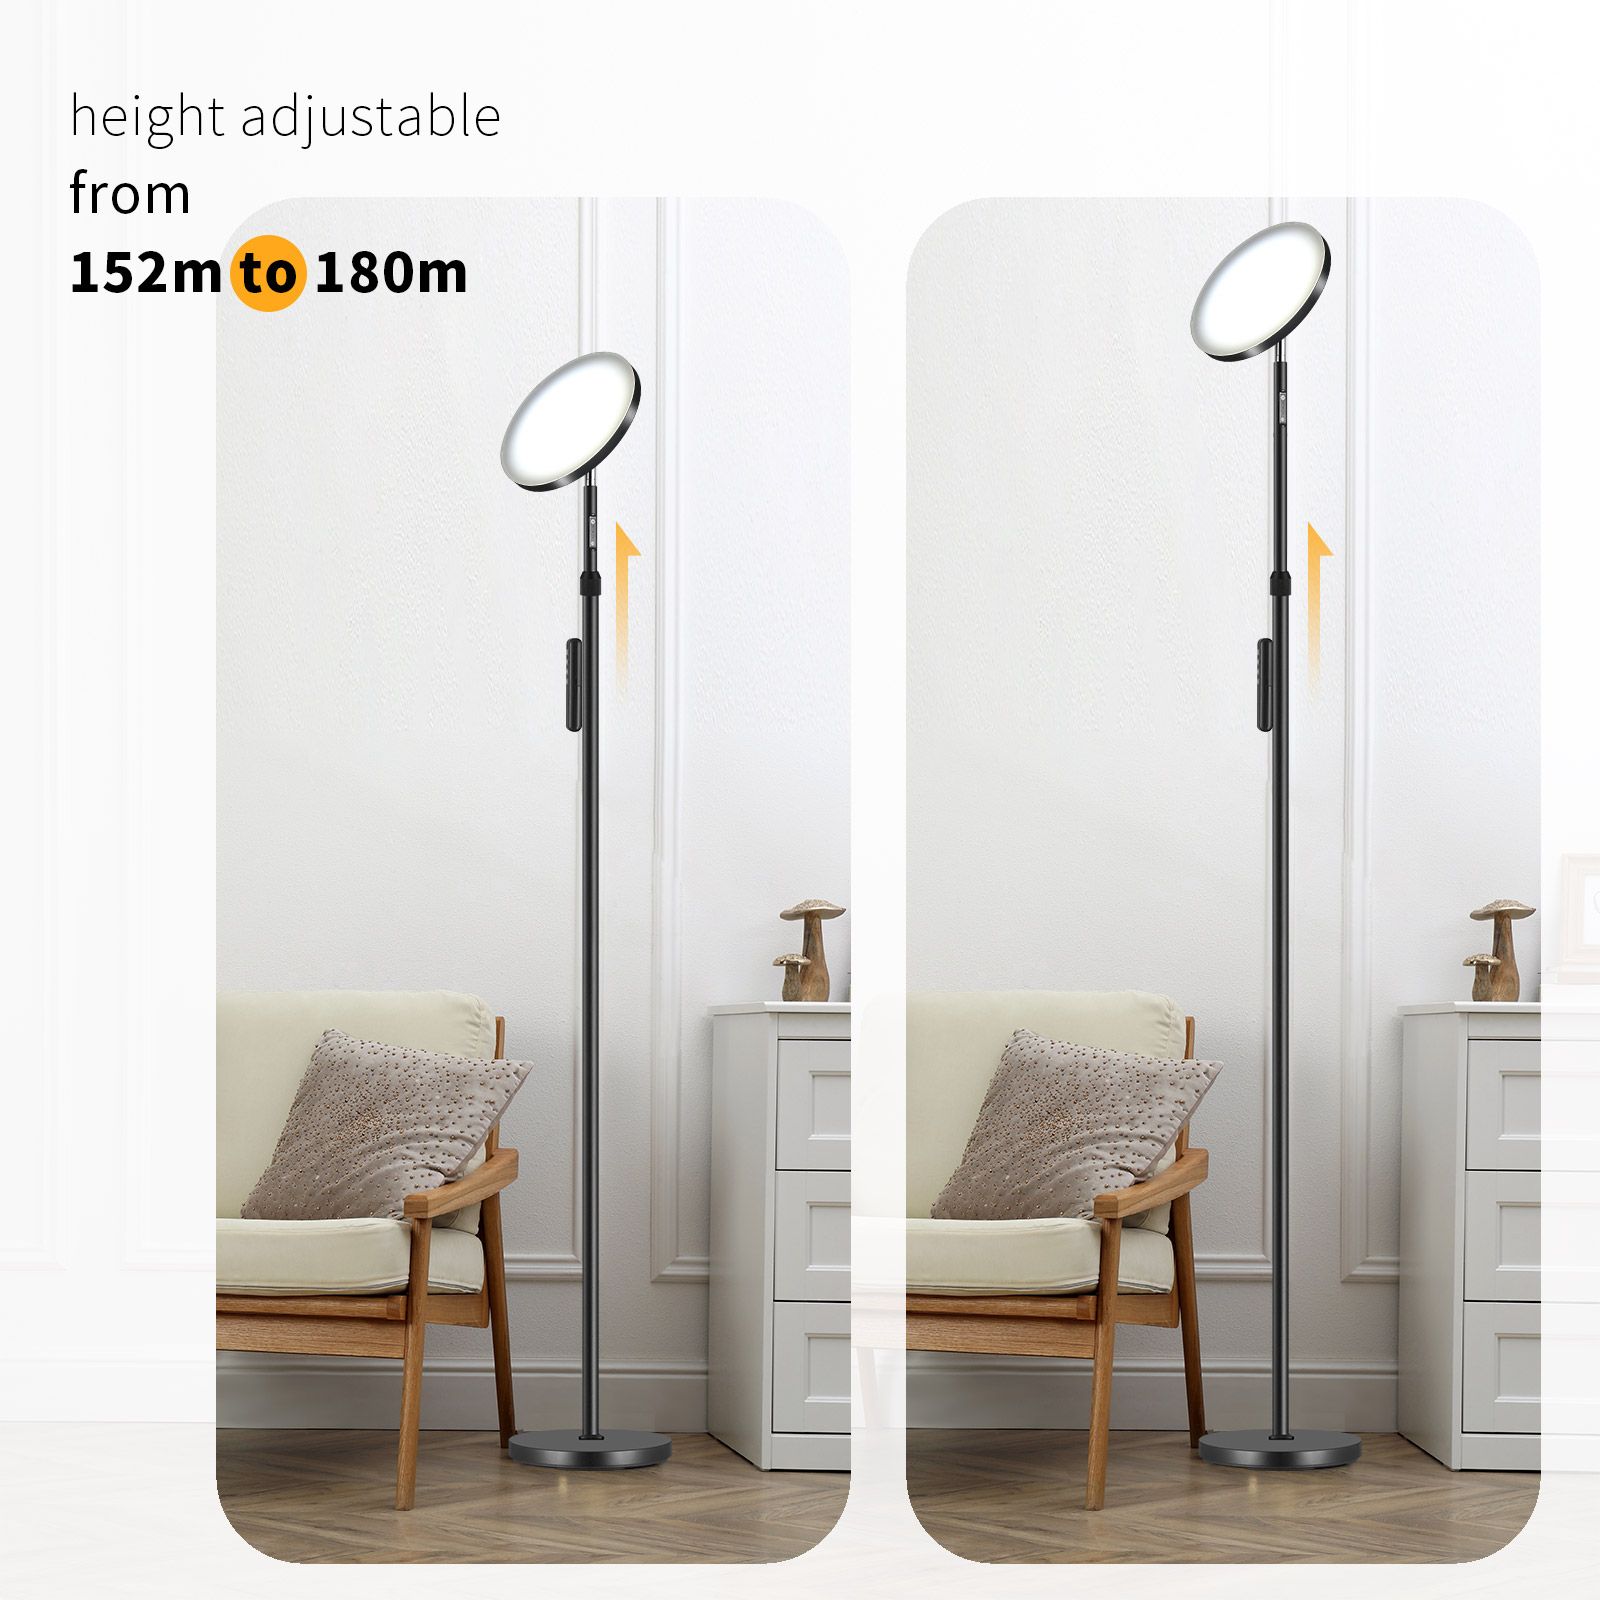 Floor lamp LED Reading Modern Double Side Lighting Height Minimalist Arc Adjustable Touch Remote Control Bedroom